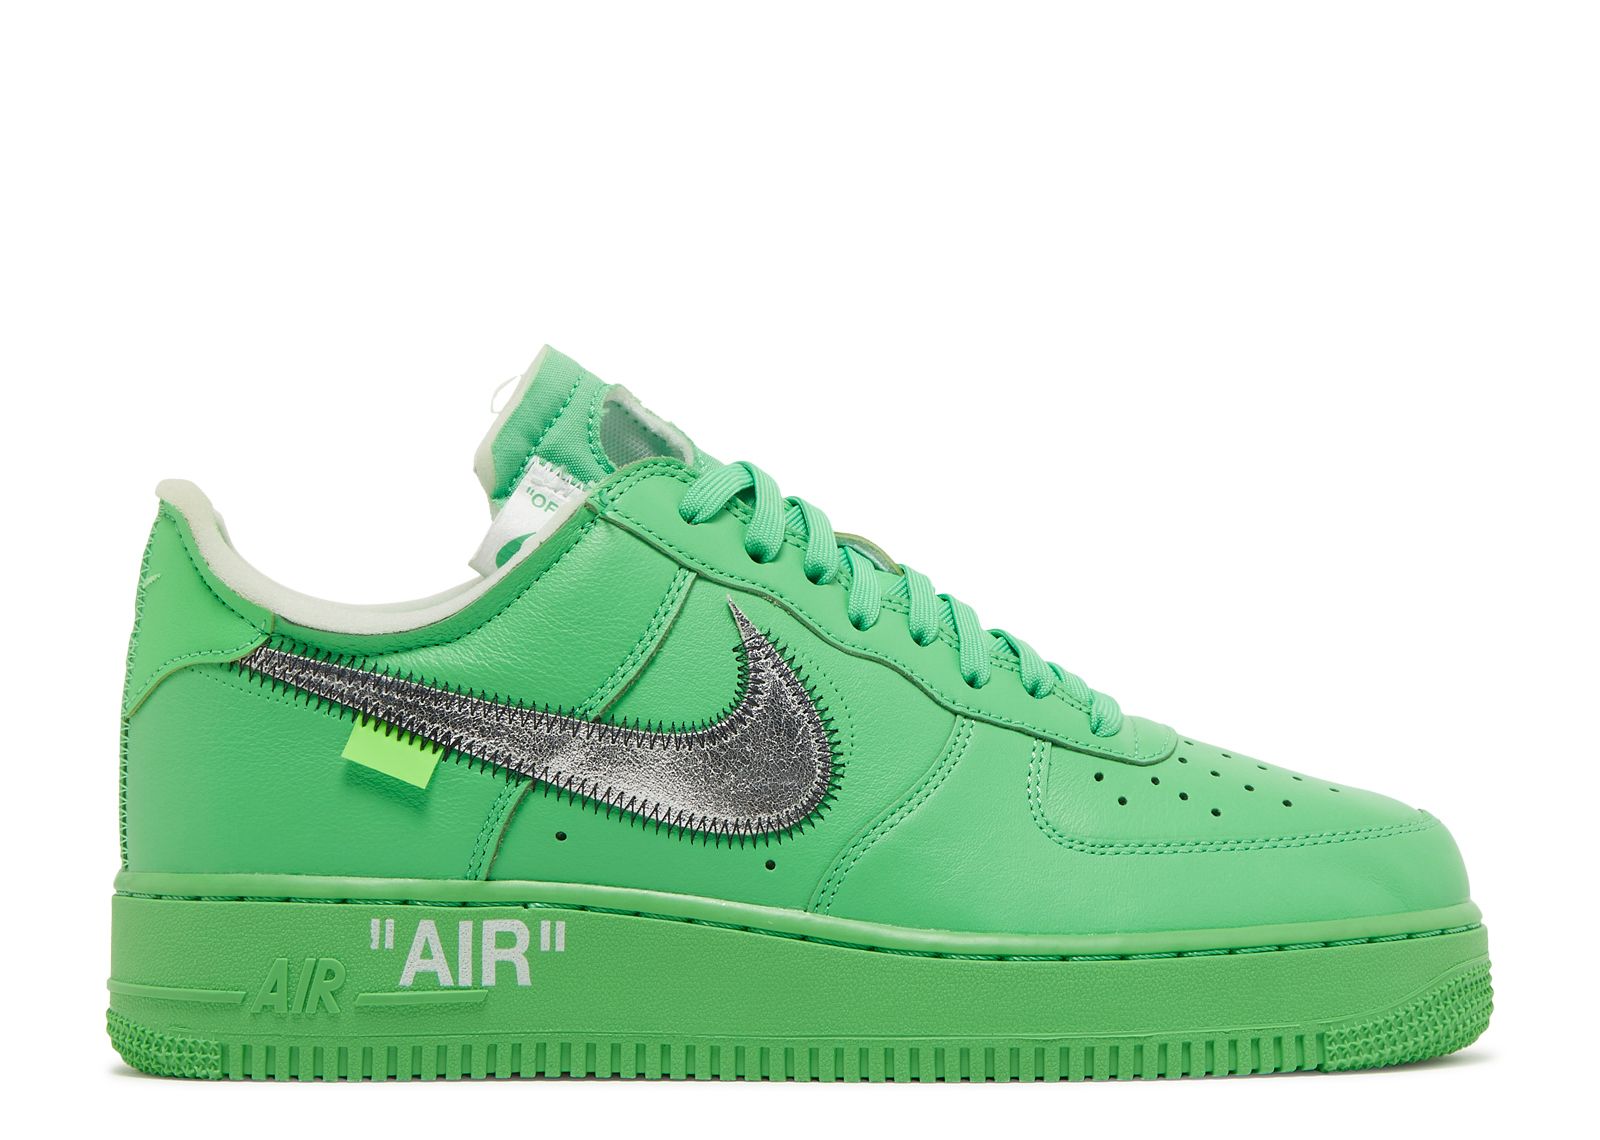 Off White X Air Force 1 Low 'Brooklyn' - Nike - DX1419 300 - light green spark | Club